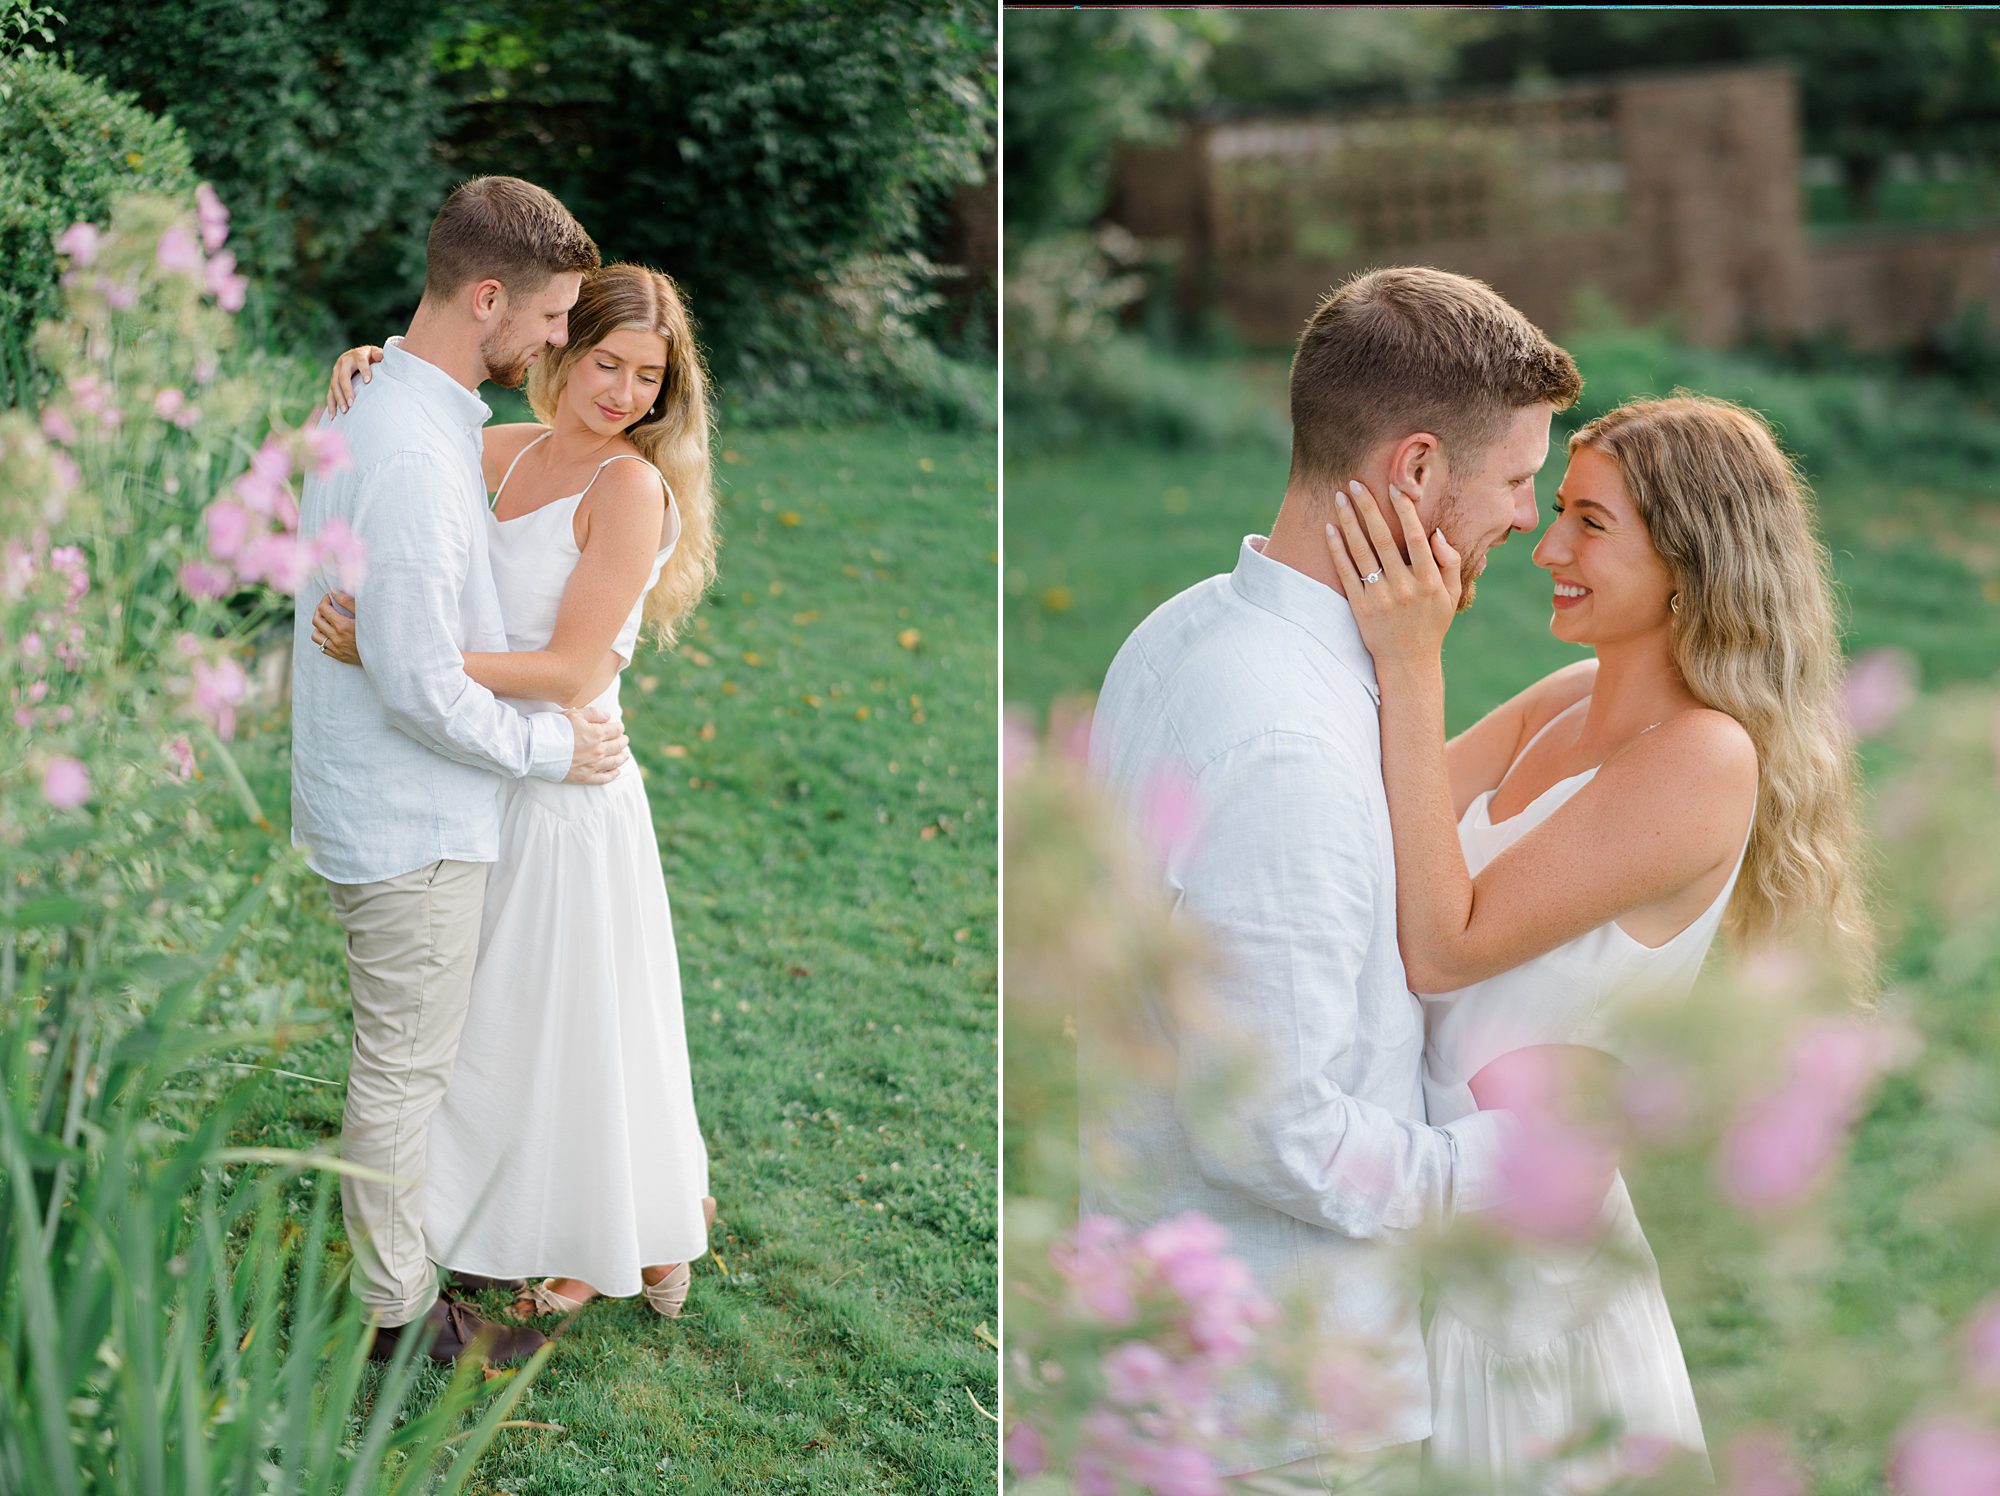 Romantic Engagement photos at The Willows